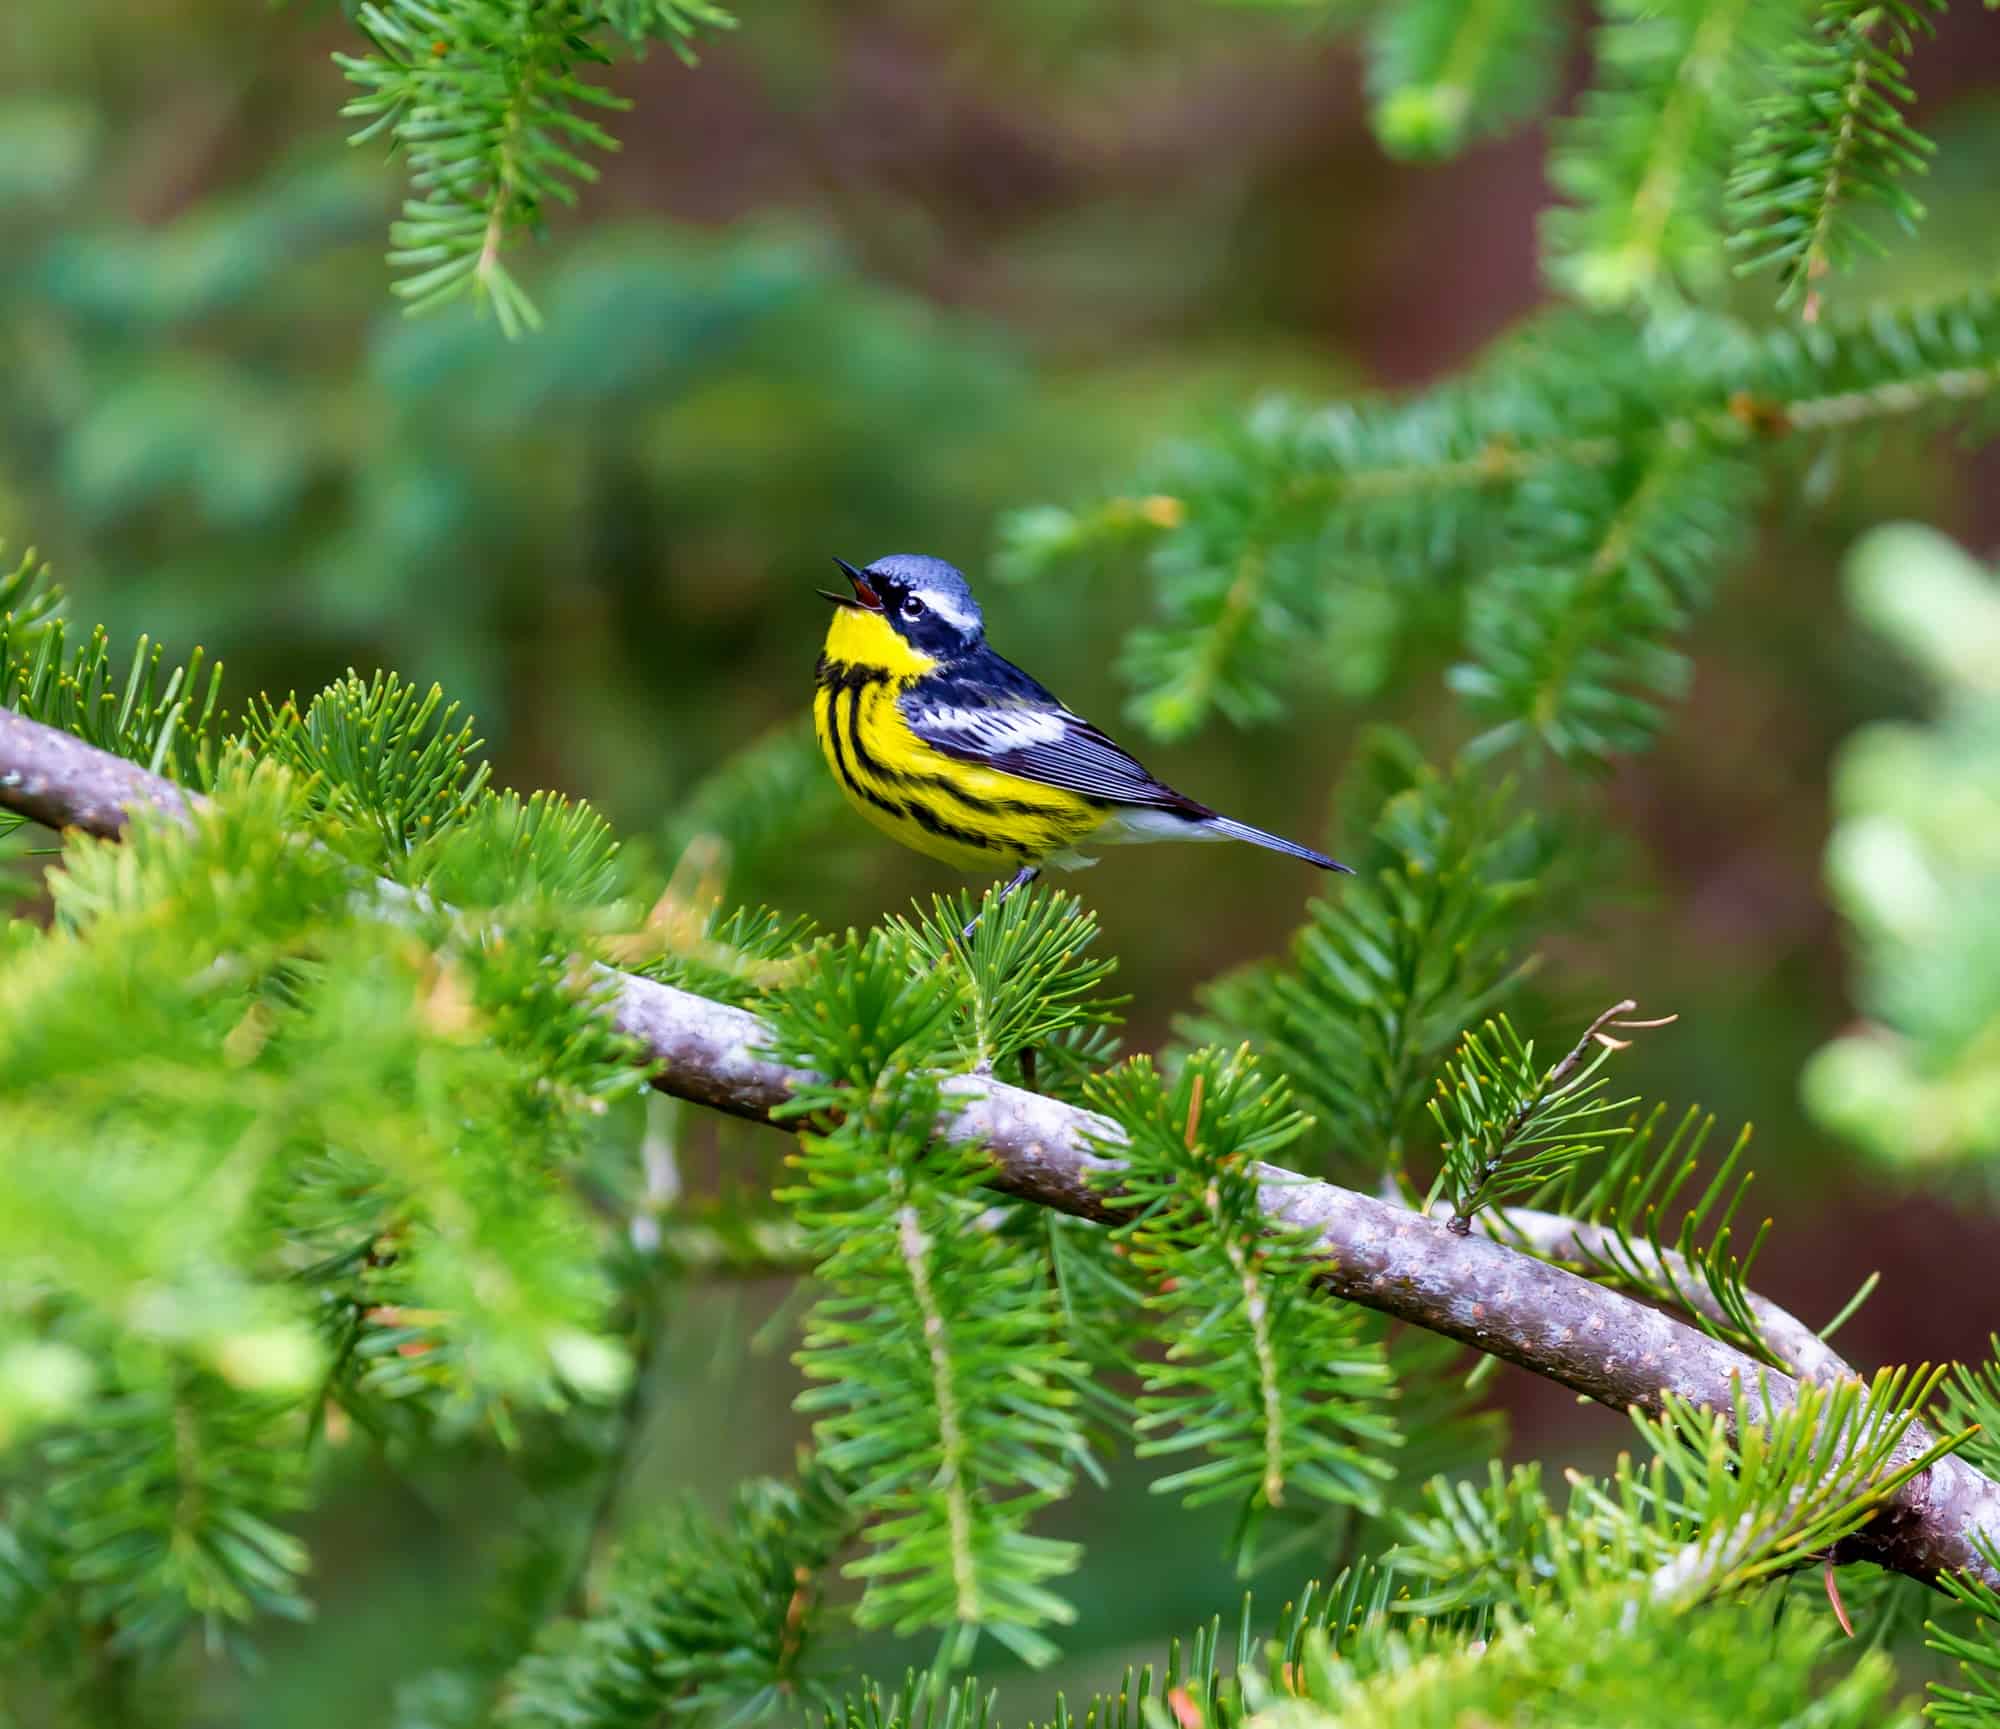 a close-up of a magnolia warbler perching on a pine tree with a yellow belly and mottled black and white wings